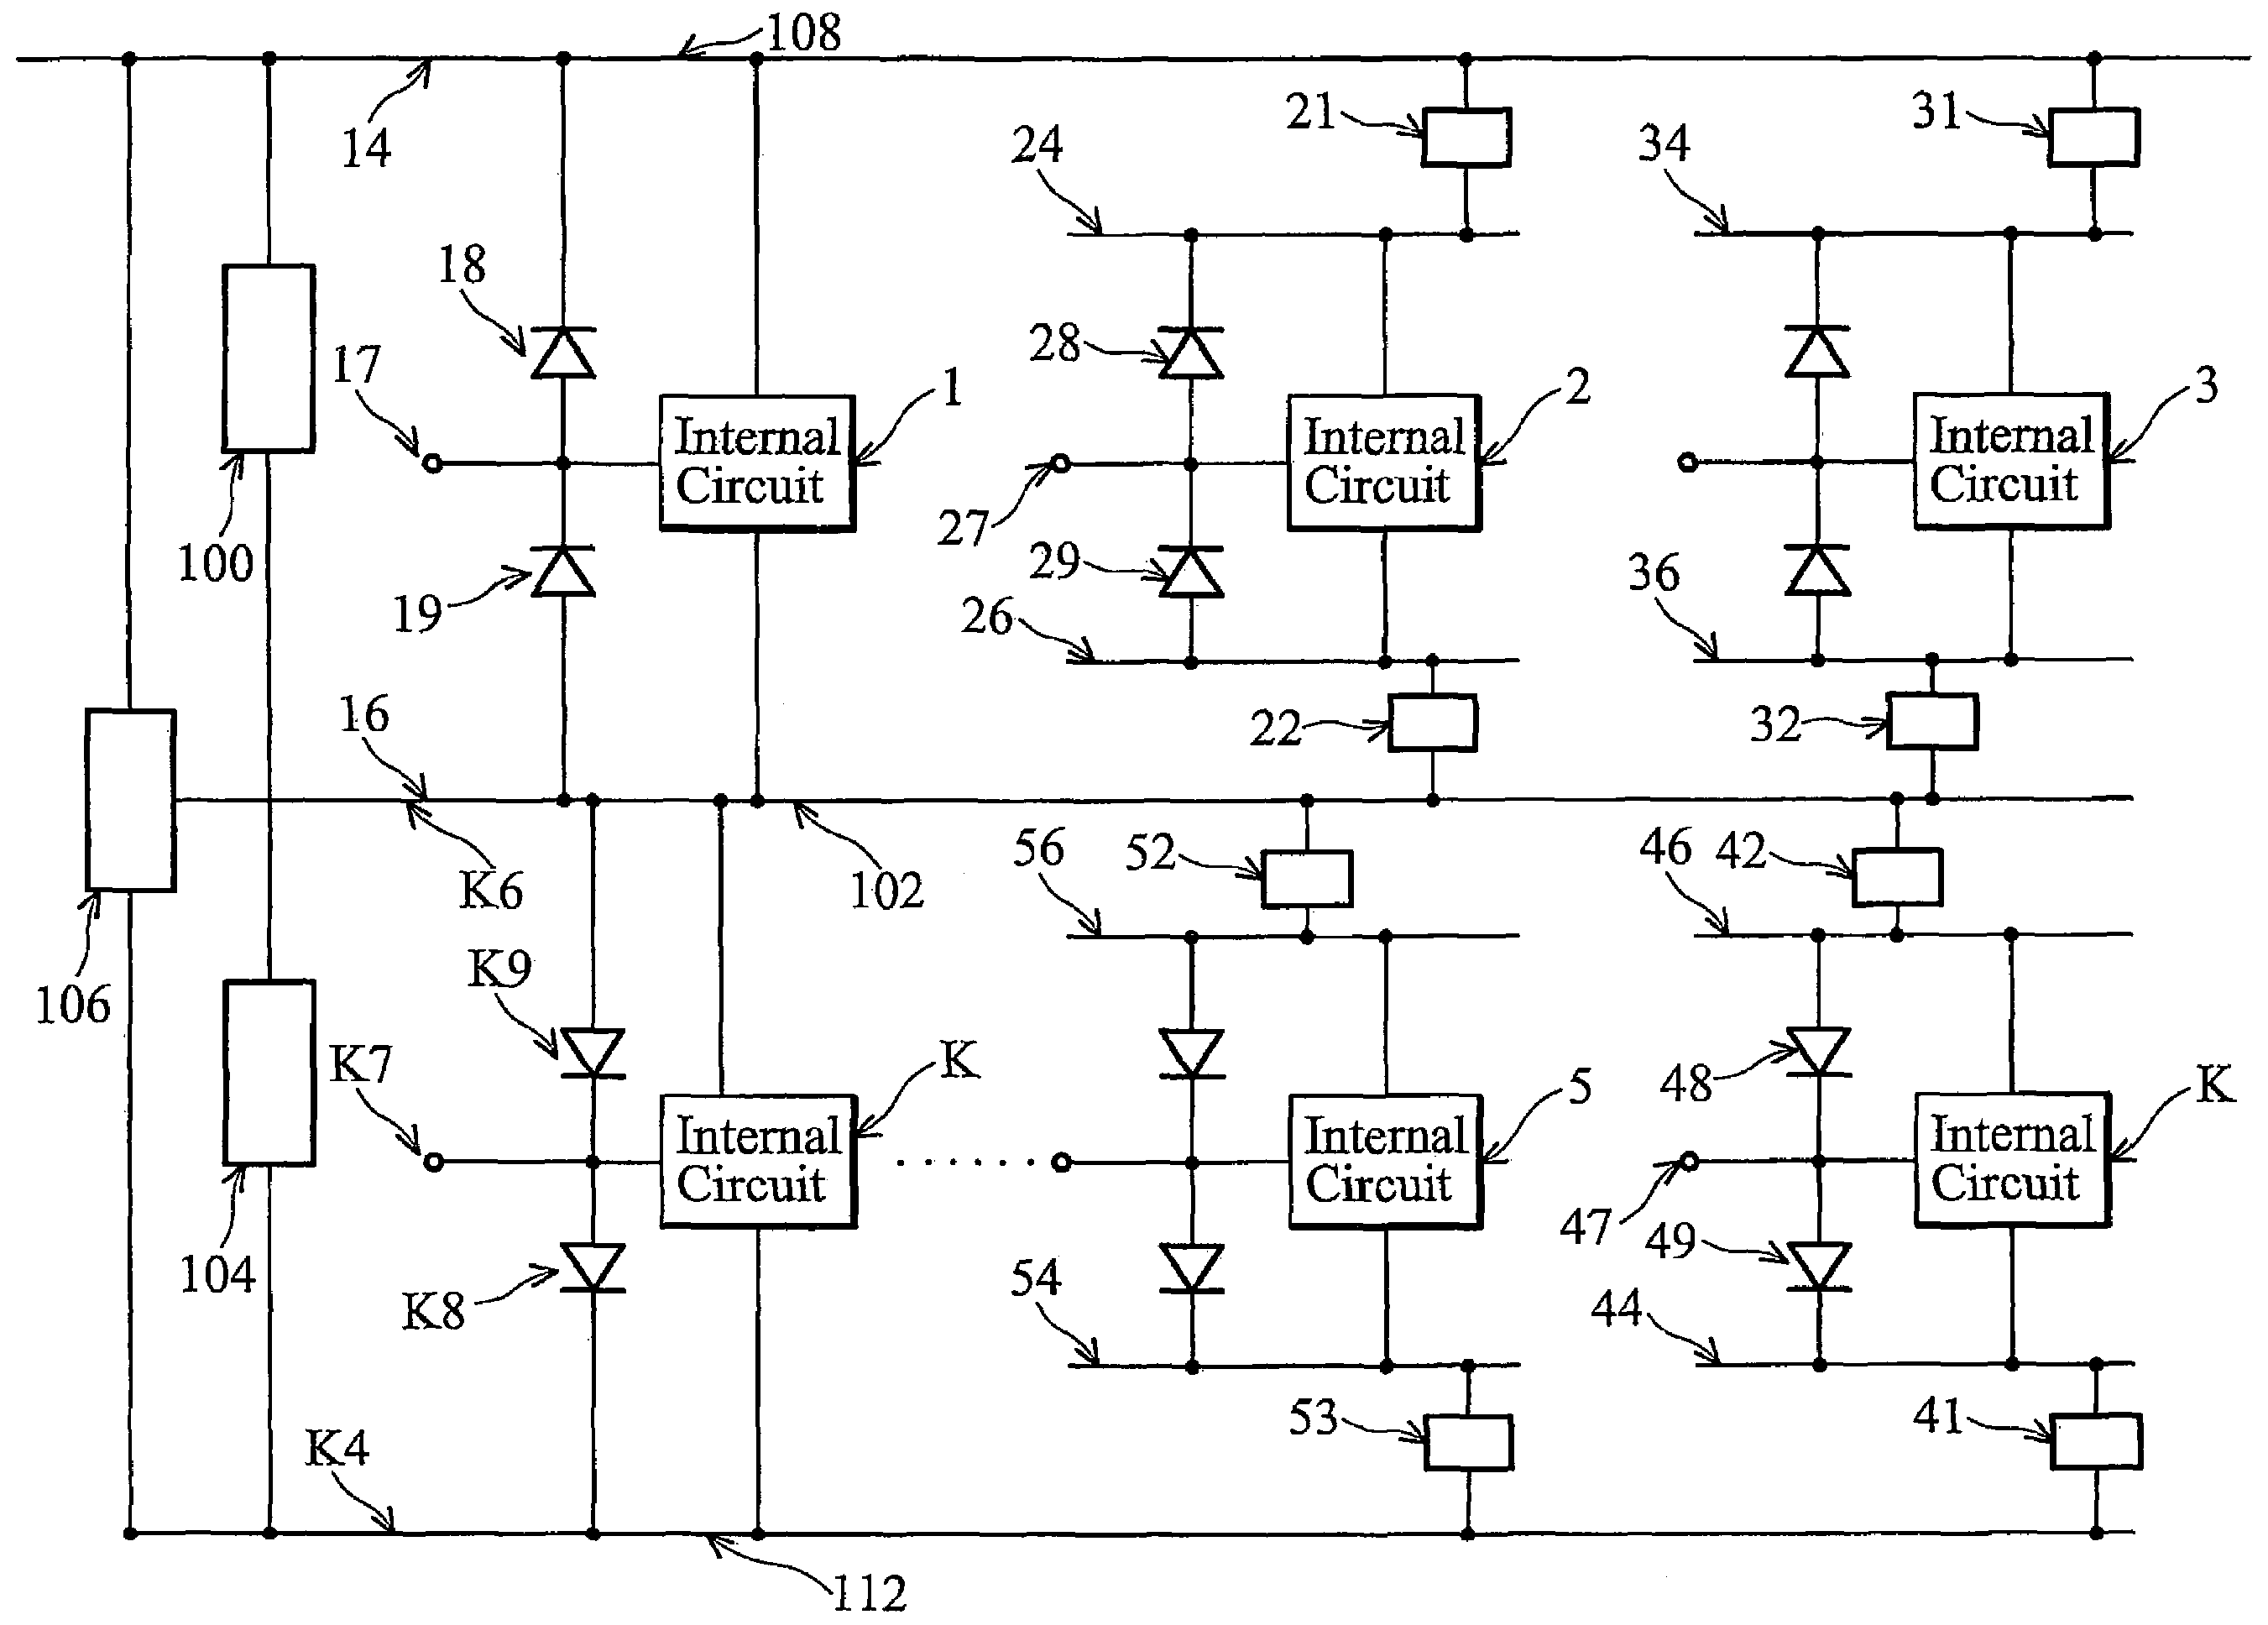 Multi-domain ESD protection circuit structure